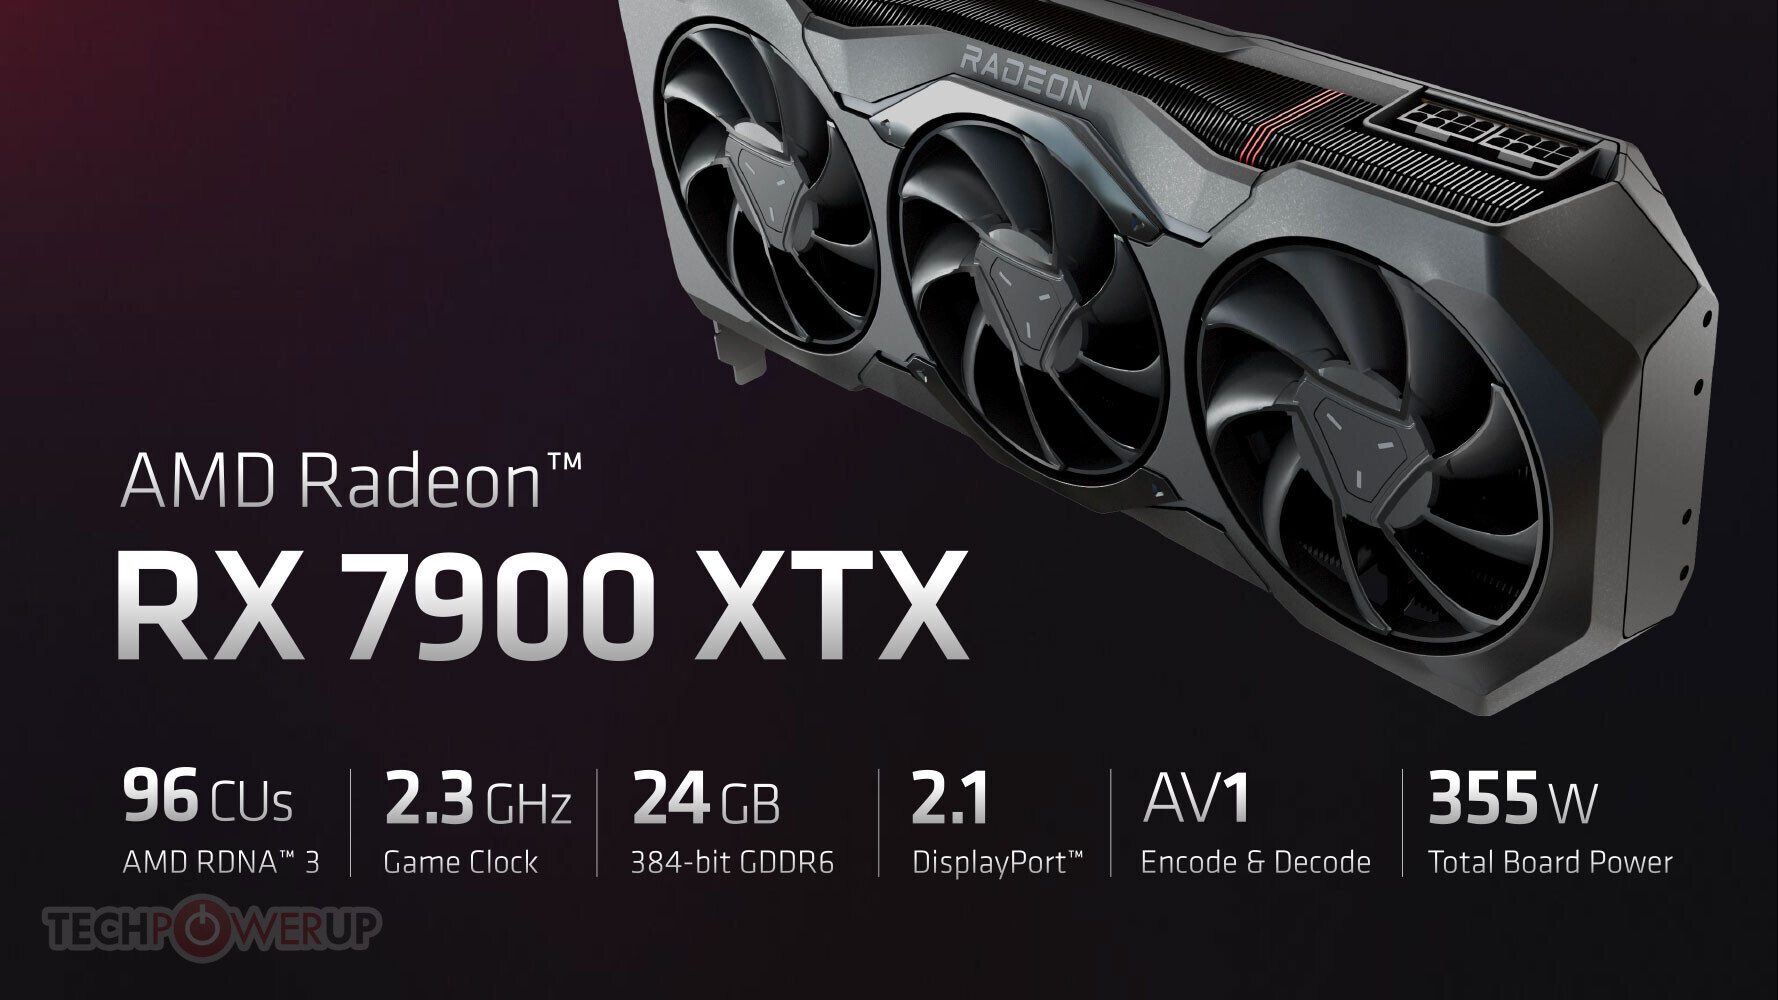 NVIDIA's Next-Gen Gaming GeForce RTX 4090 In August, RTX 4080 In September,  RTX 4070 Graphics Card In October, Alleges Rumor